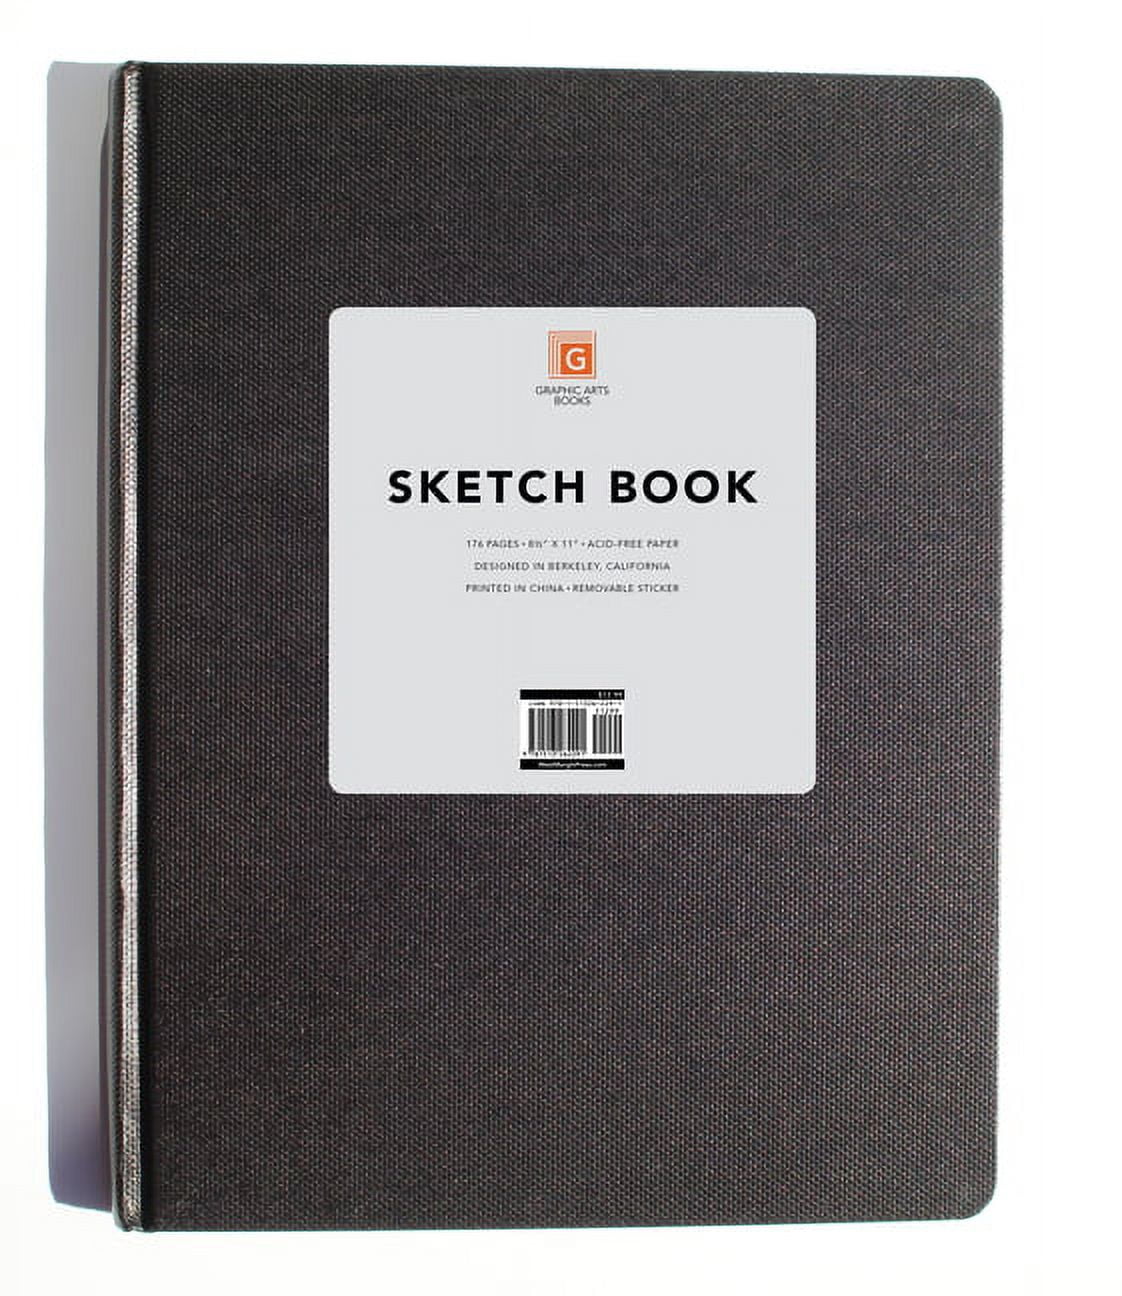 Just My Style Ultimate Sketchbook Kit for Kids, 80-Pages Total 